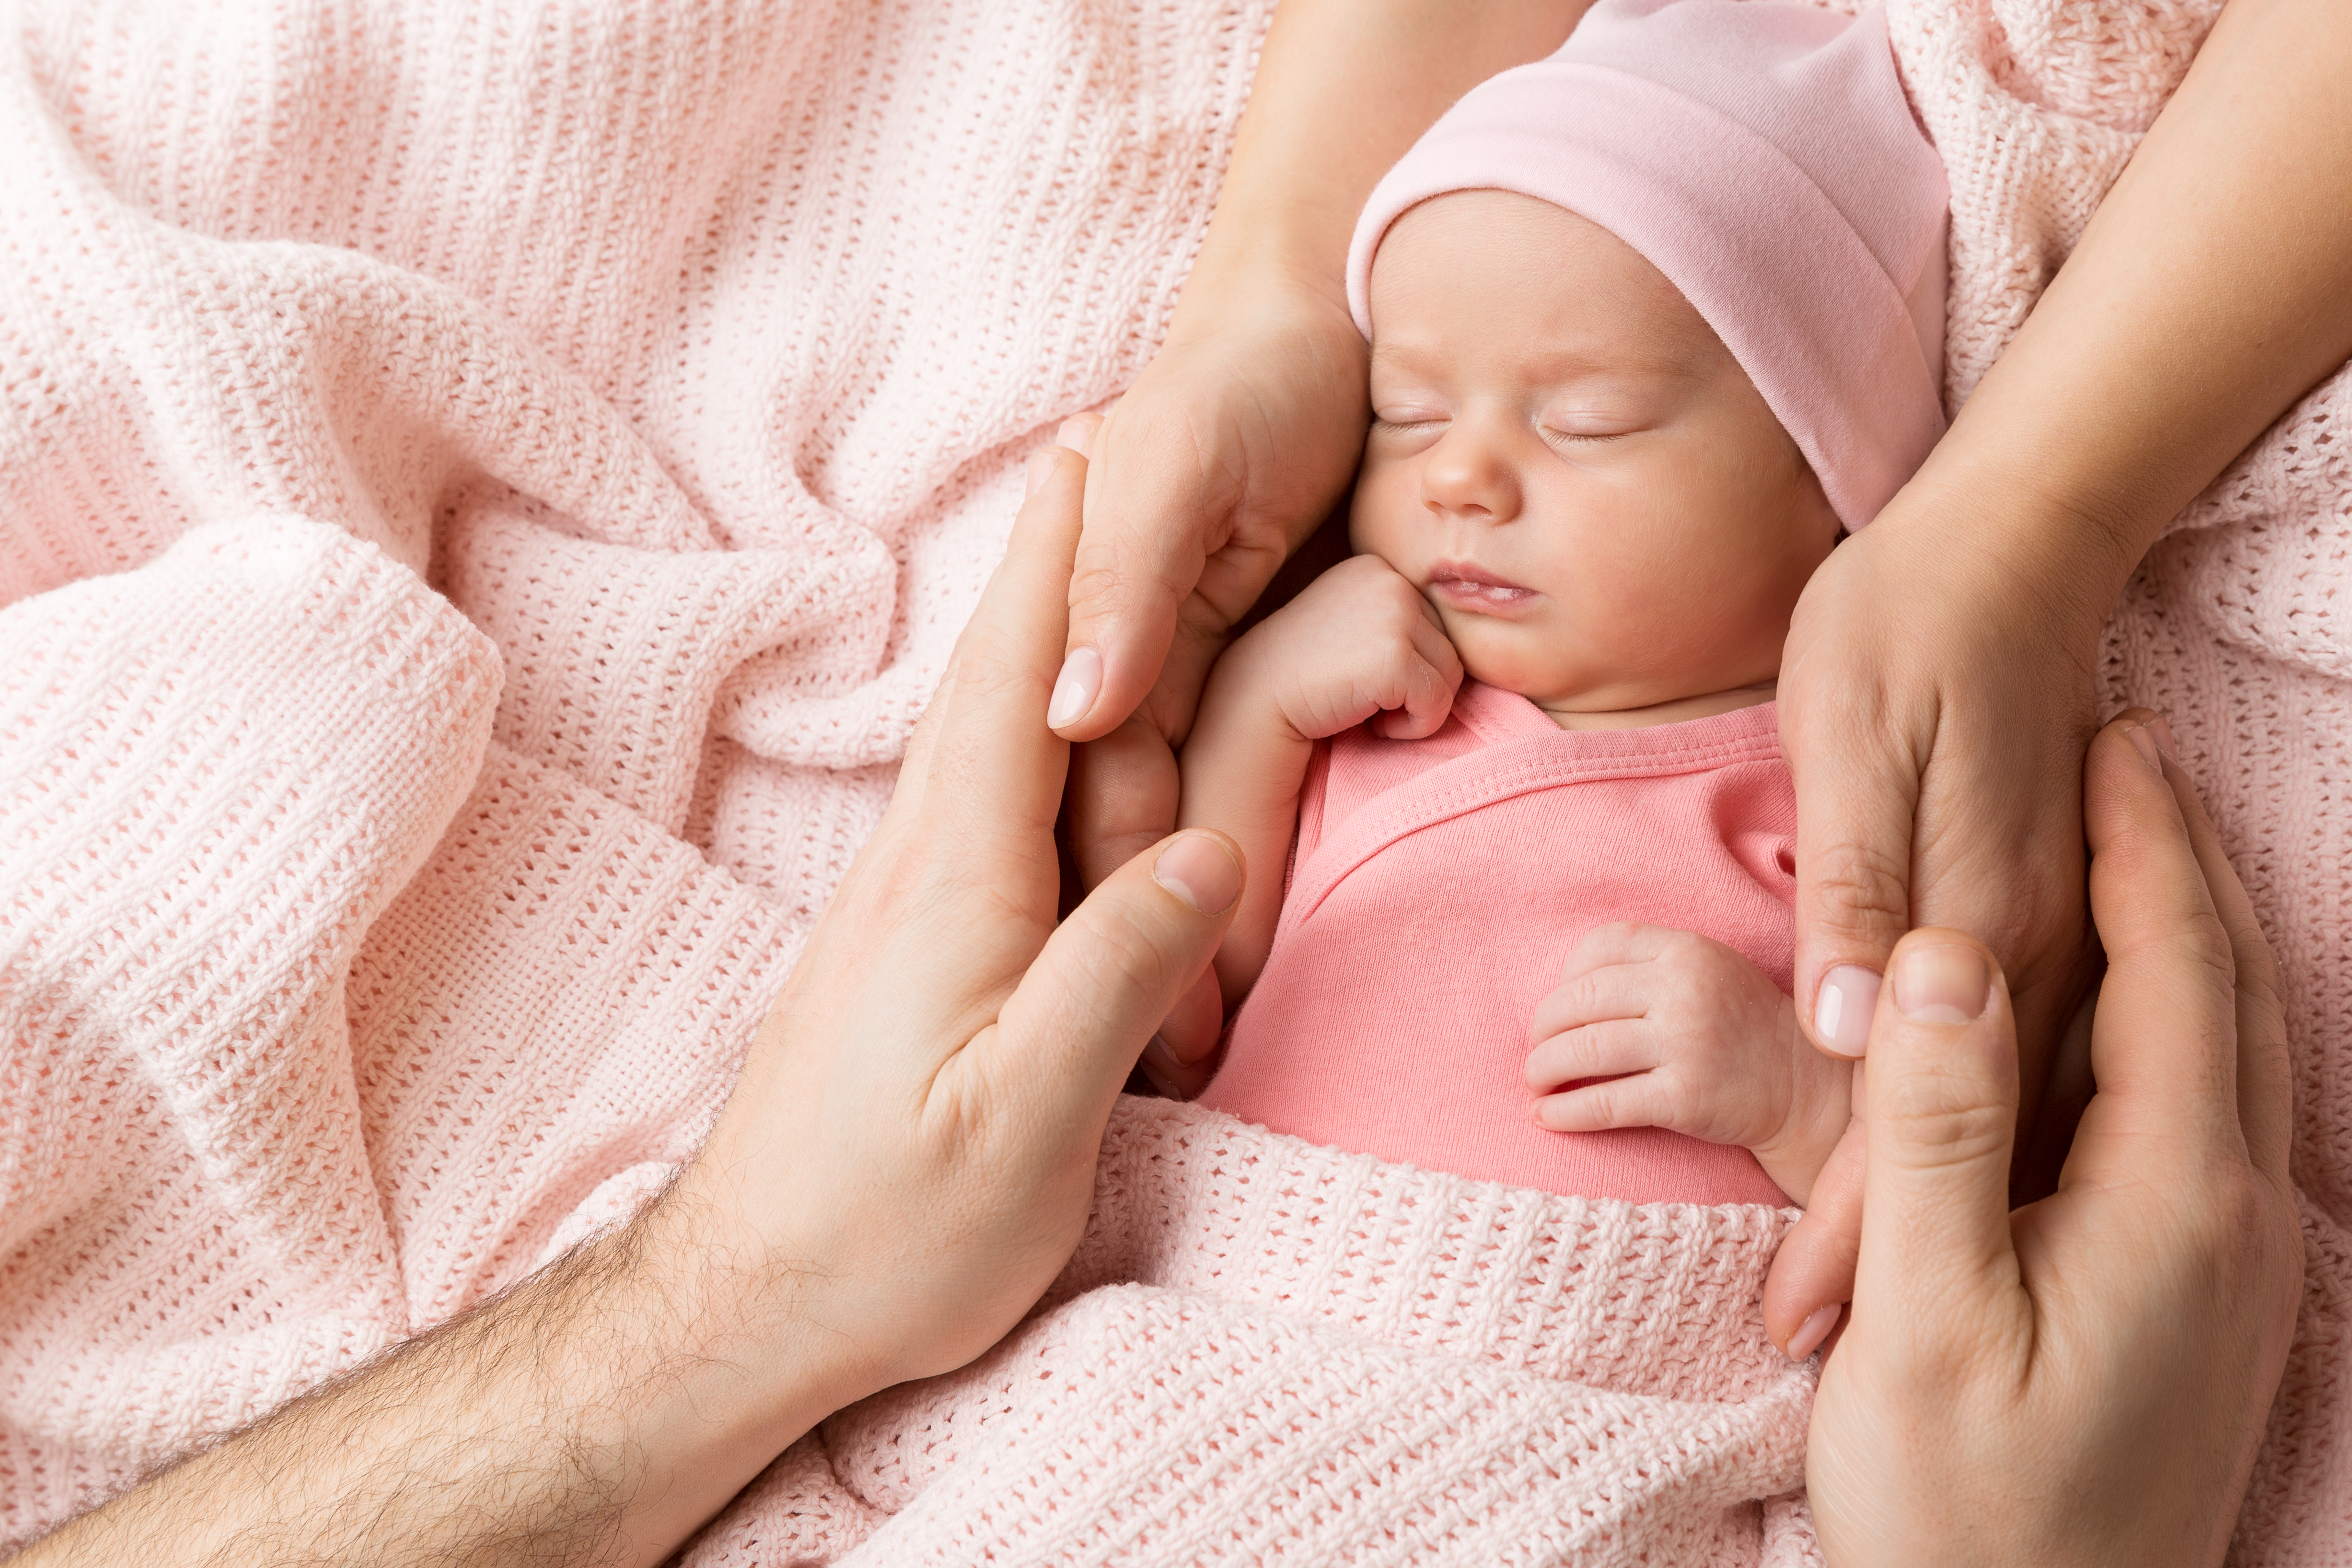 A baby wearing a pink outfit and hat lays on a pink blanket. Large, adult hands cradle the baby.